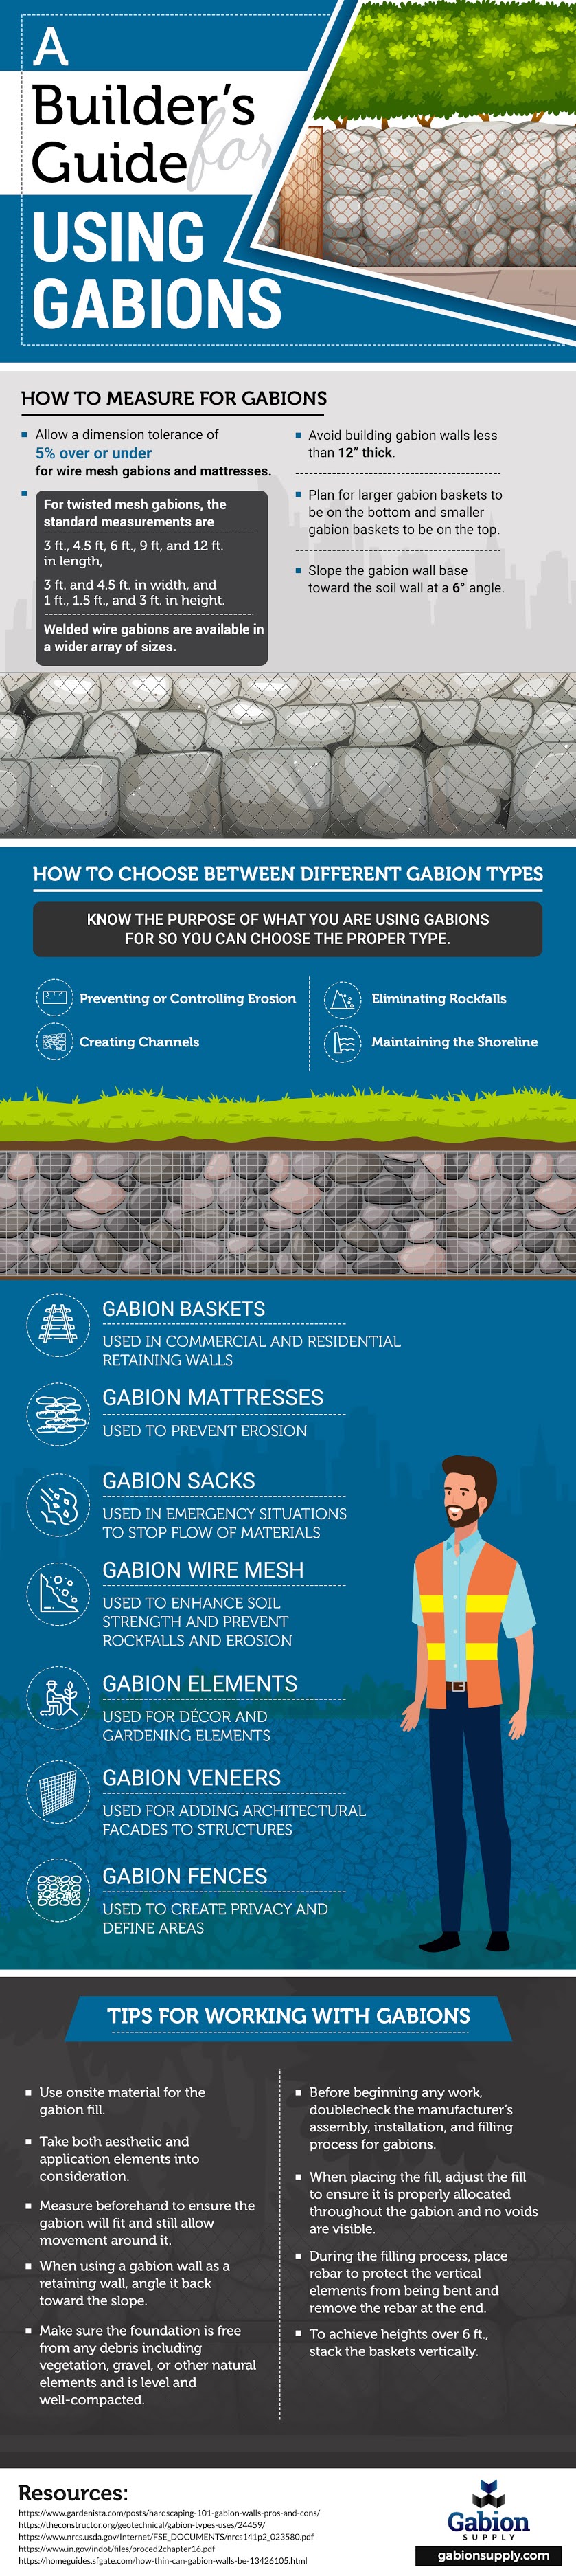 A Builder’s Guide for Using Gabions #Infographic